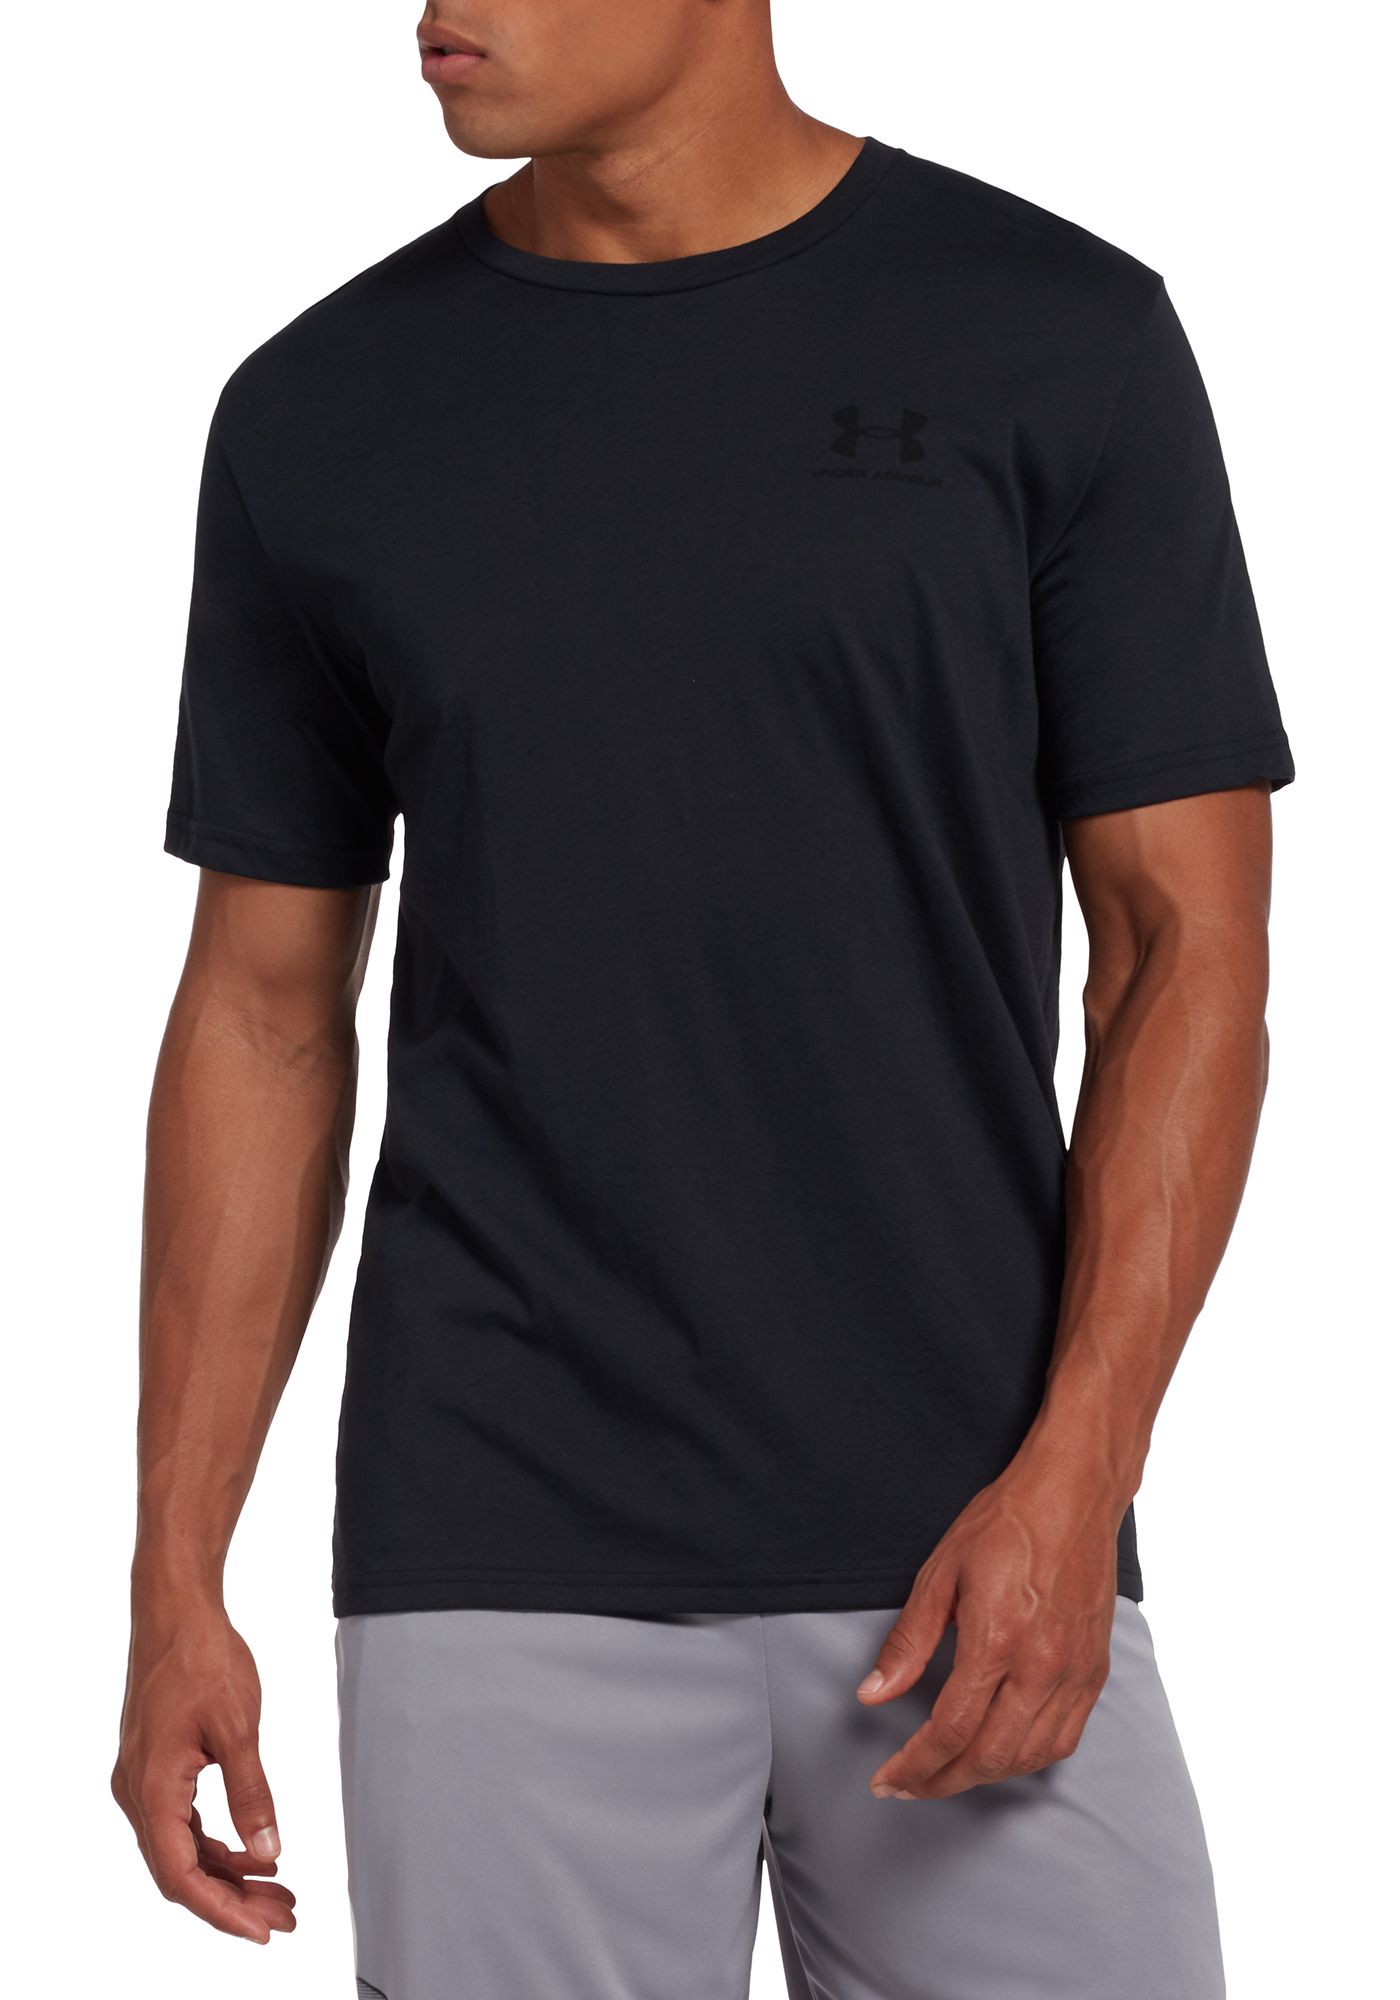 best under armour compression shirt for tall guys at gym